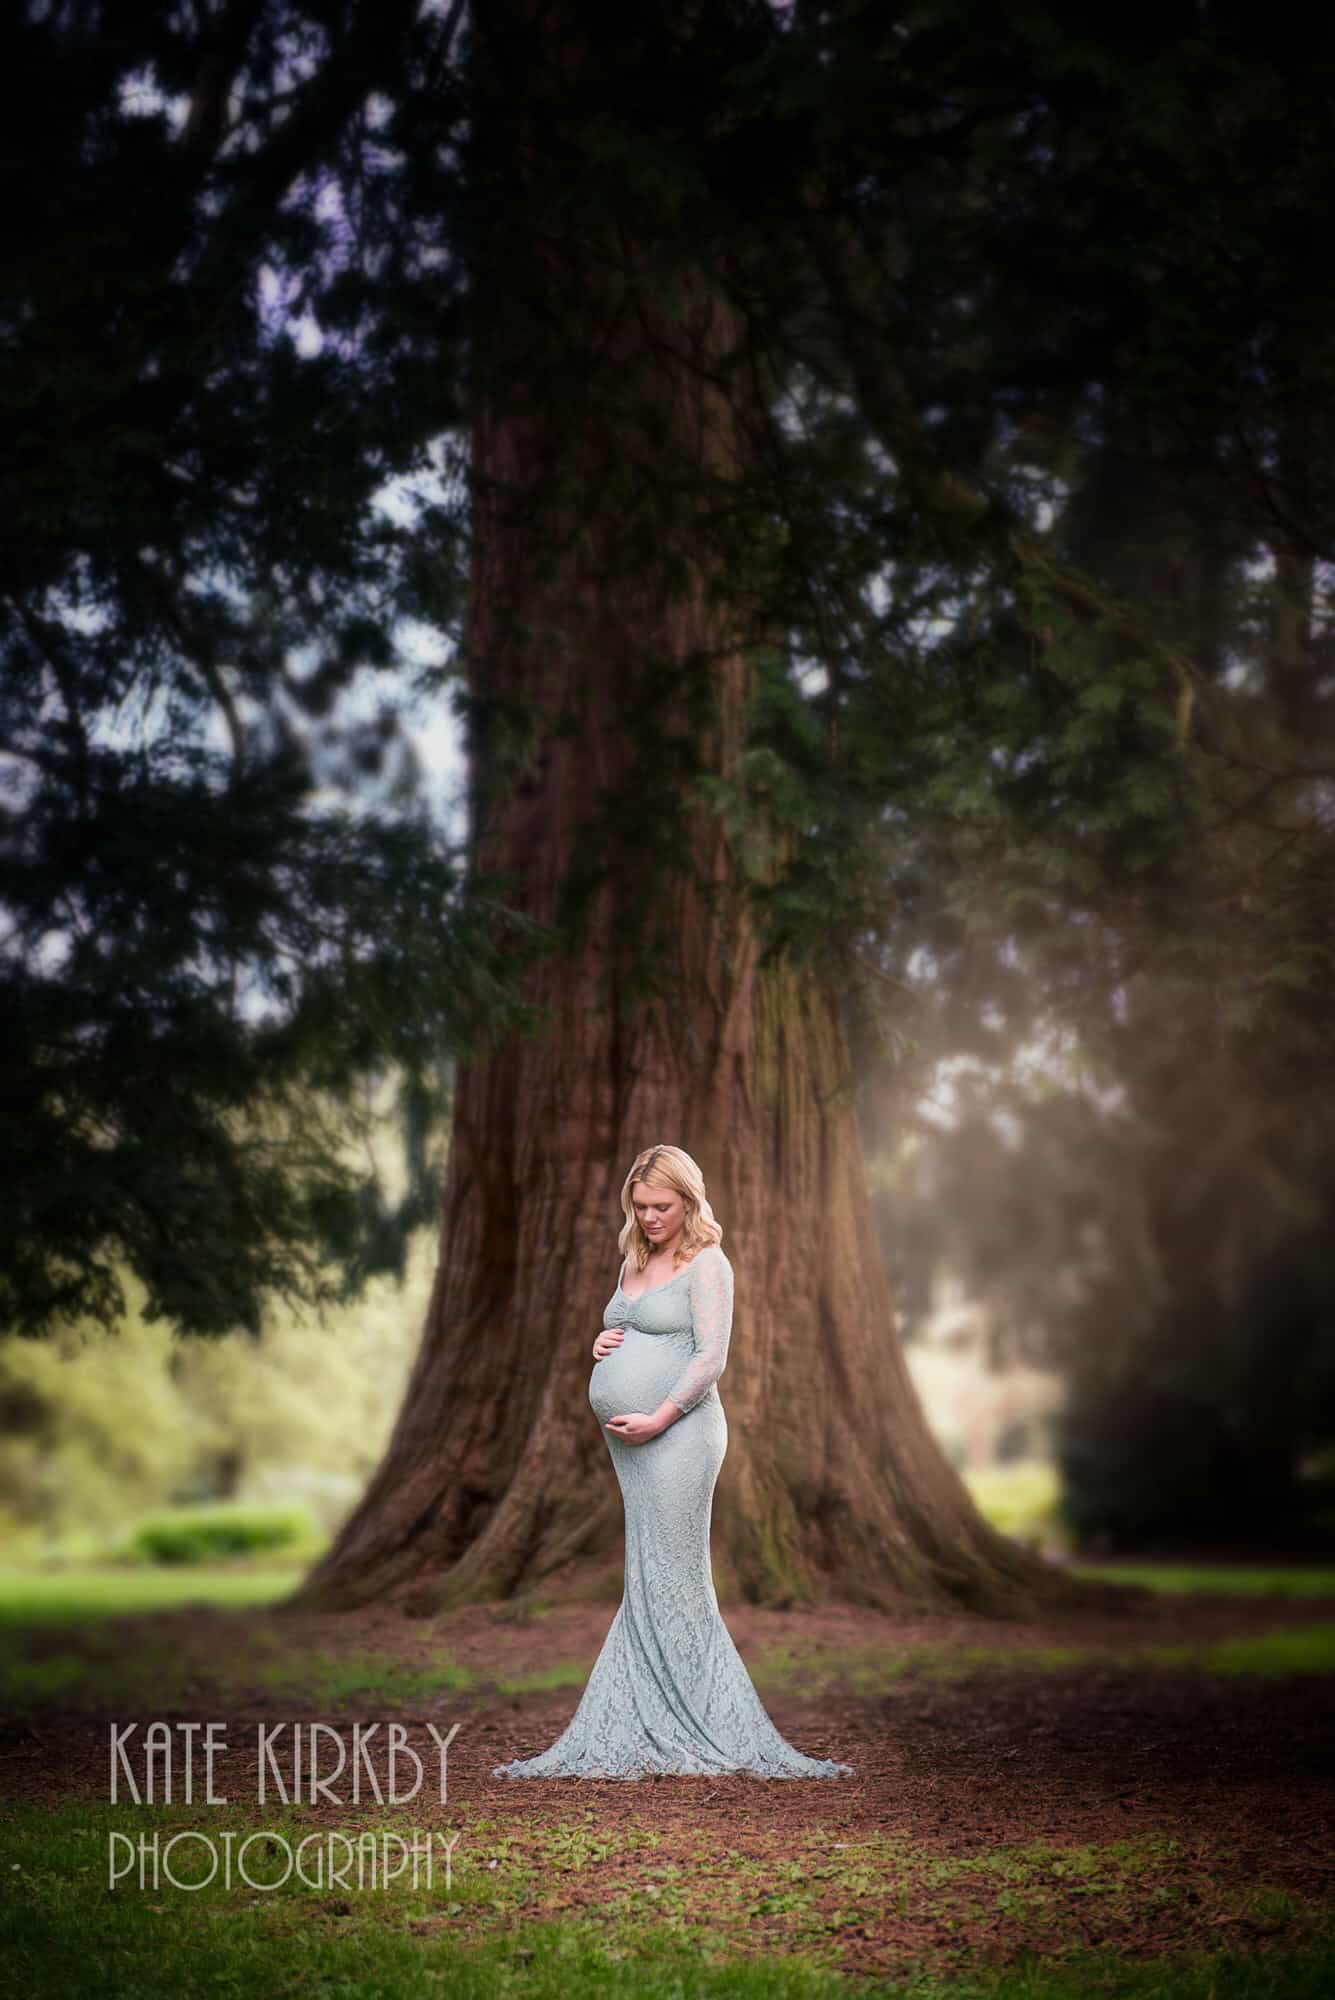 pregnant woman wear long pale green dress stanging in front of giant redwood tree